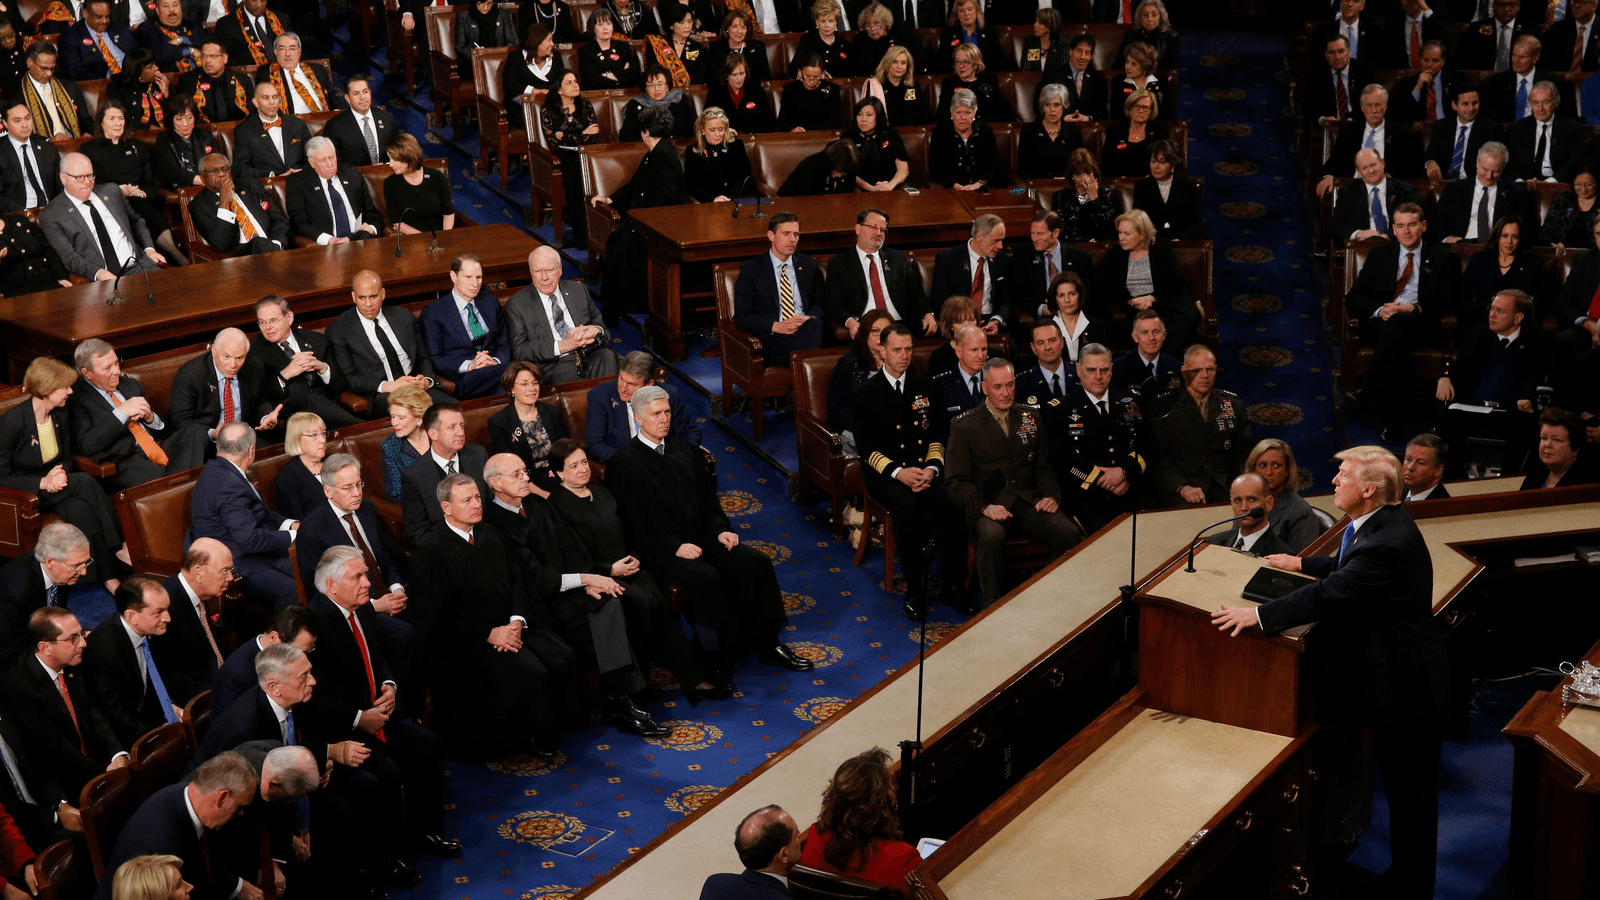 US President Donald Trump delivers his State of the Union address to a joint session of the US Congress on Capitol Hill in Washington, Jan. 30, 2018.